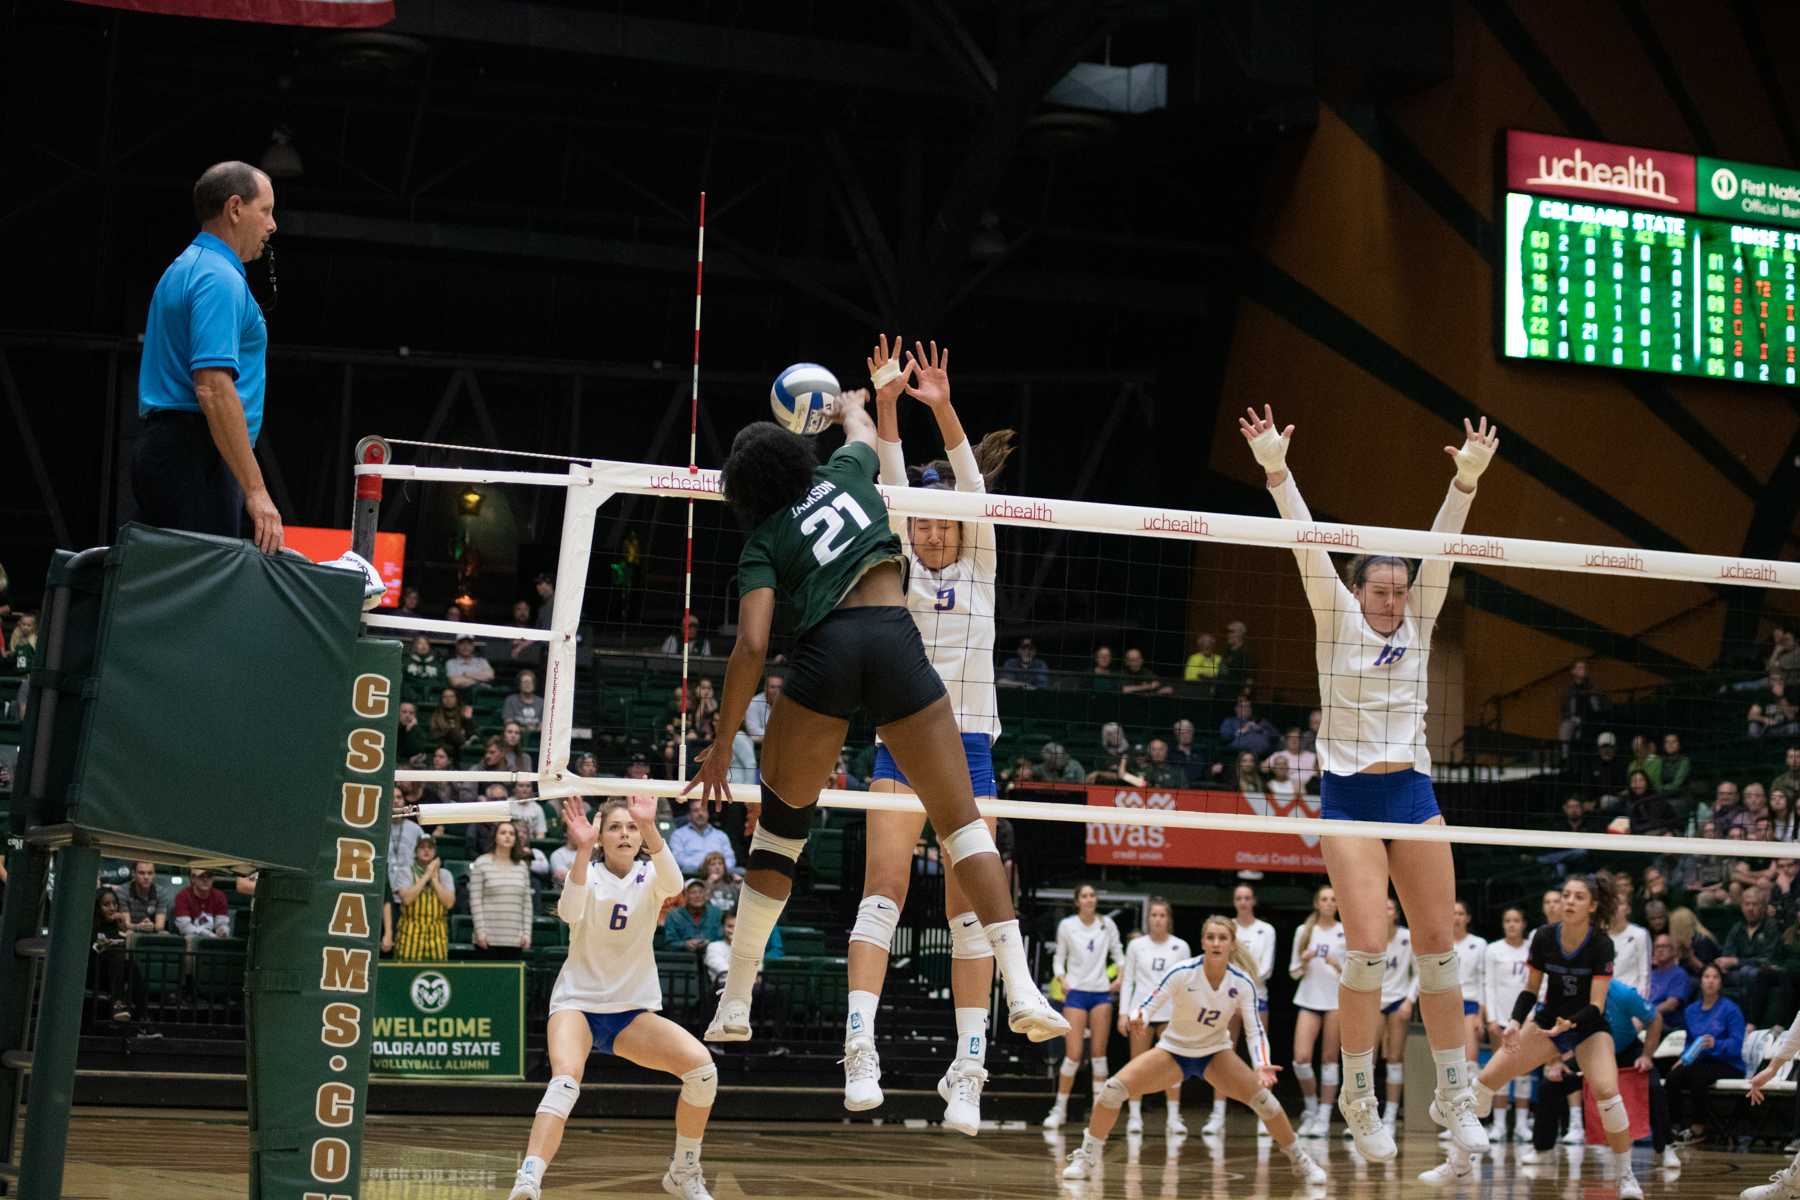 Past+Photos%3A+Volleyball+Mountain+West+Championship